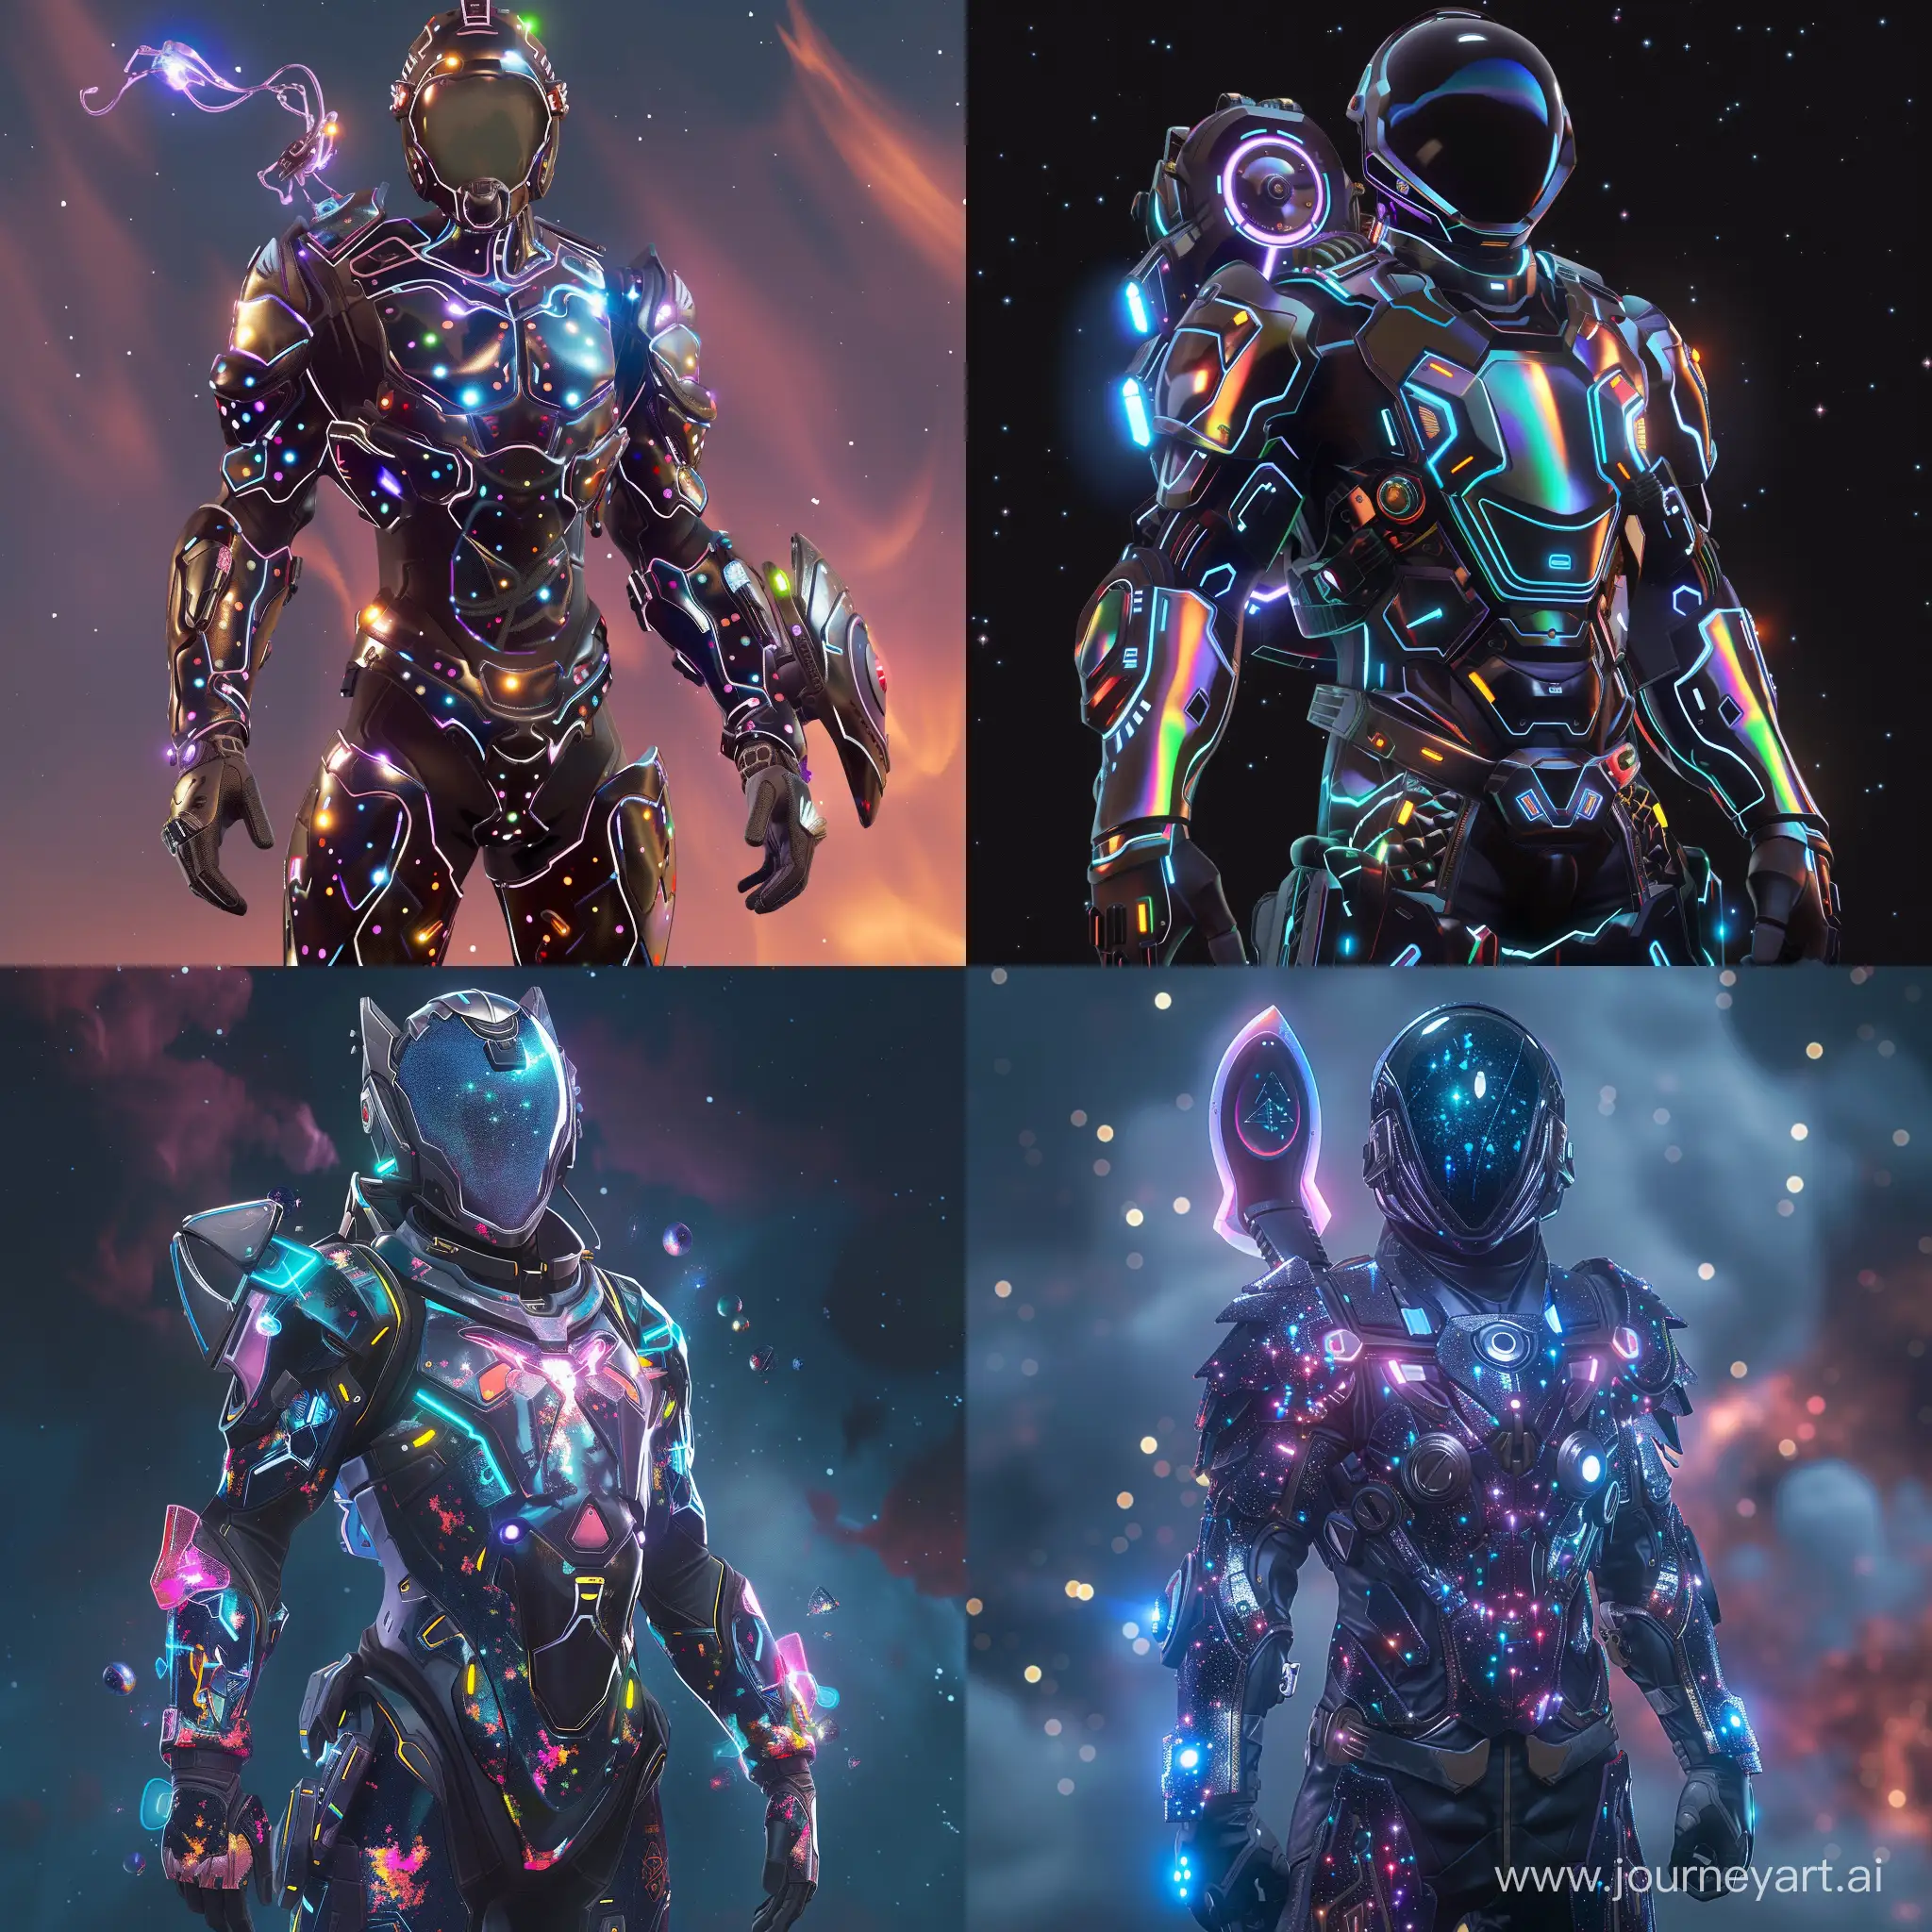 Introducing "Galactic Guardian" – a sleek, futuristic warrior adorned in cosmic armor with holographic accents. Ready to defend the galaxy, this skin comes equipped with a pulsating energy blade harvesting tool and a cosmic shield back bling. Will you conquer the island with interstellar style?